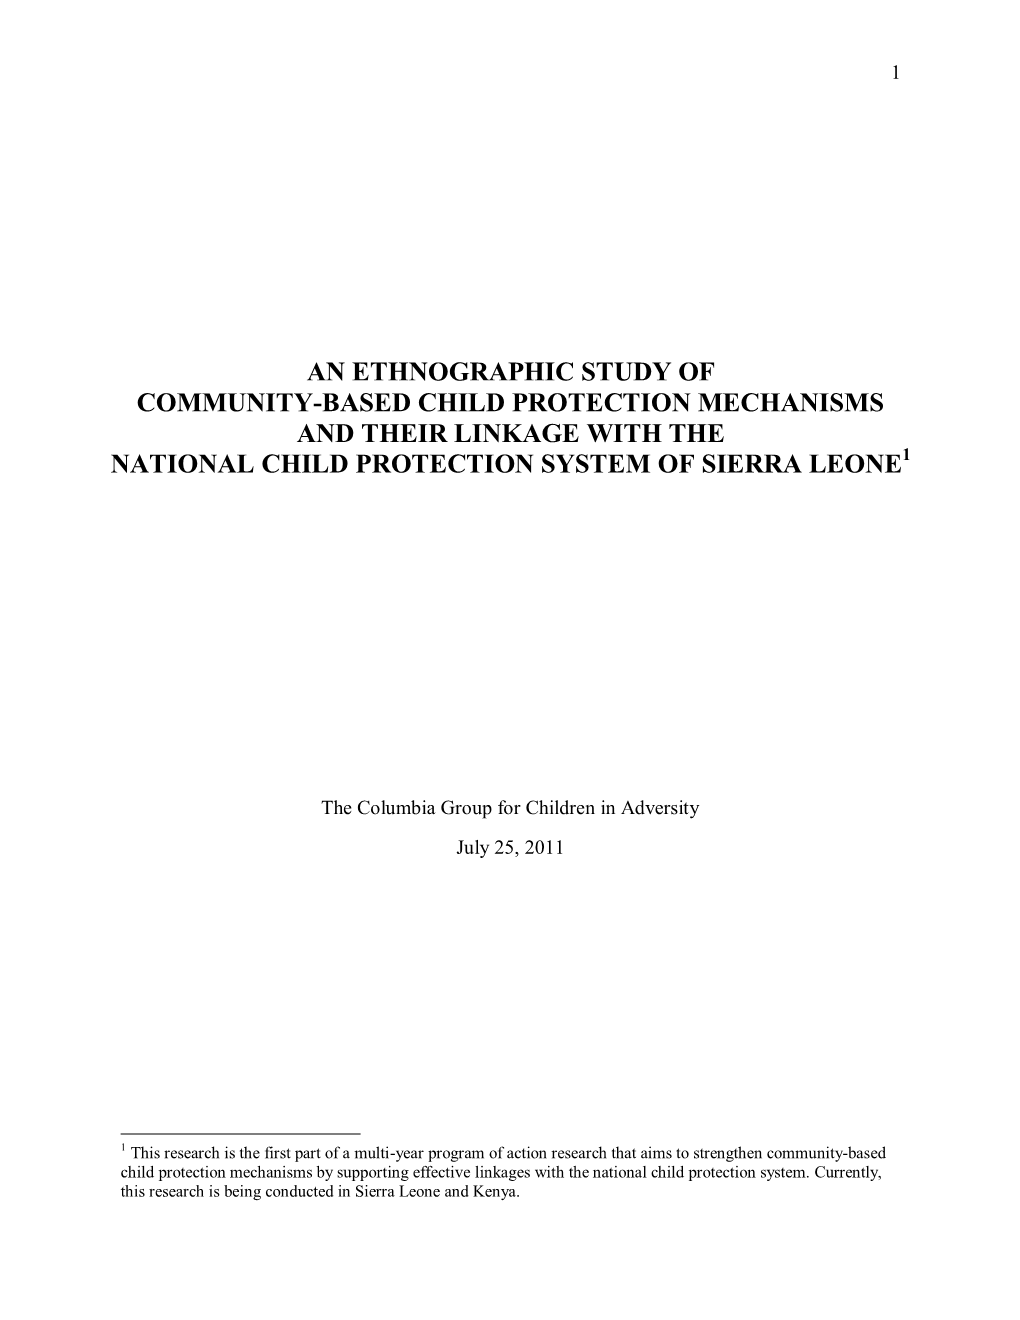 An Ethnographic Study of Community-Based Child Protection Mechanisms and Their Linkage with the National Child Protection System of Sierra Leone1